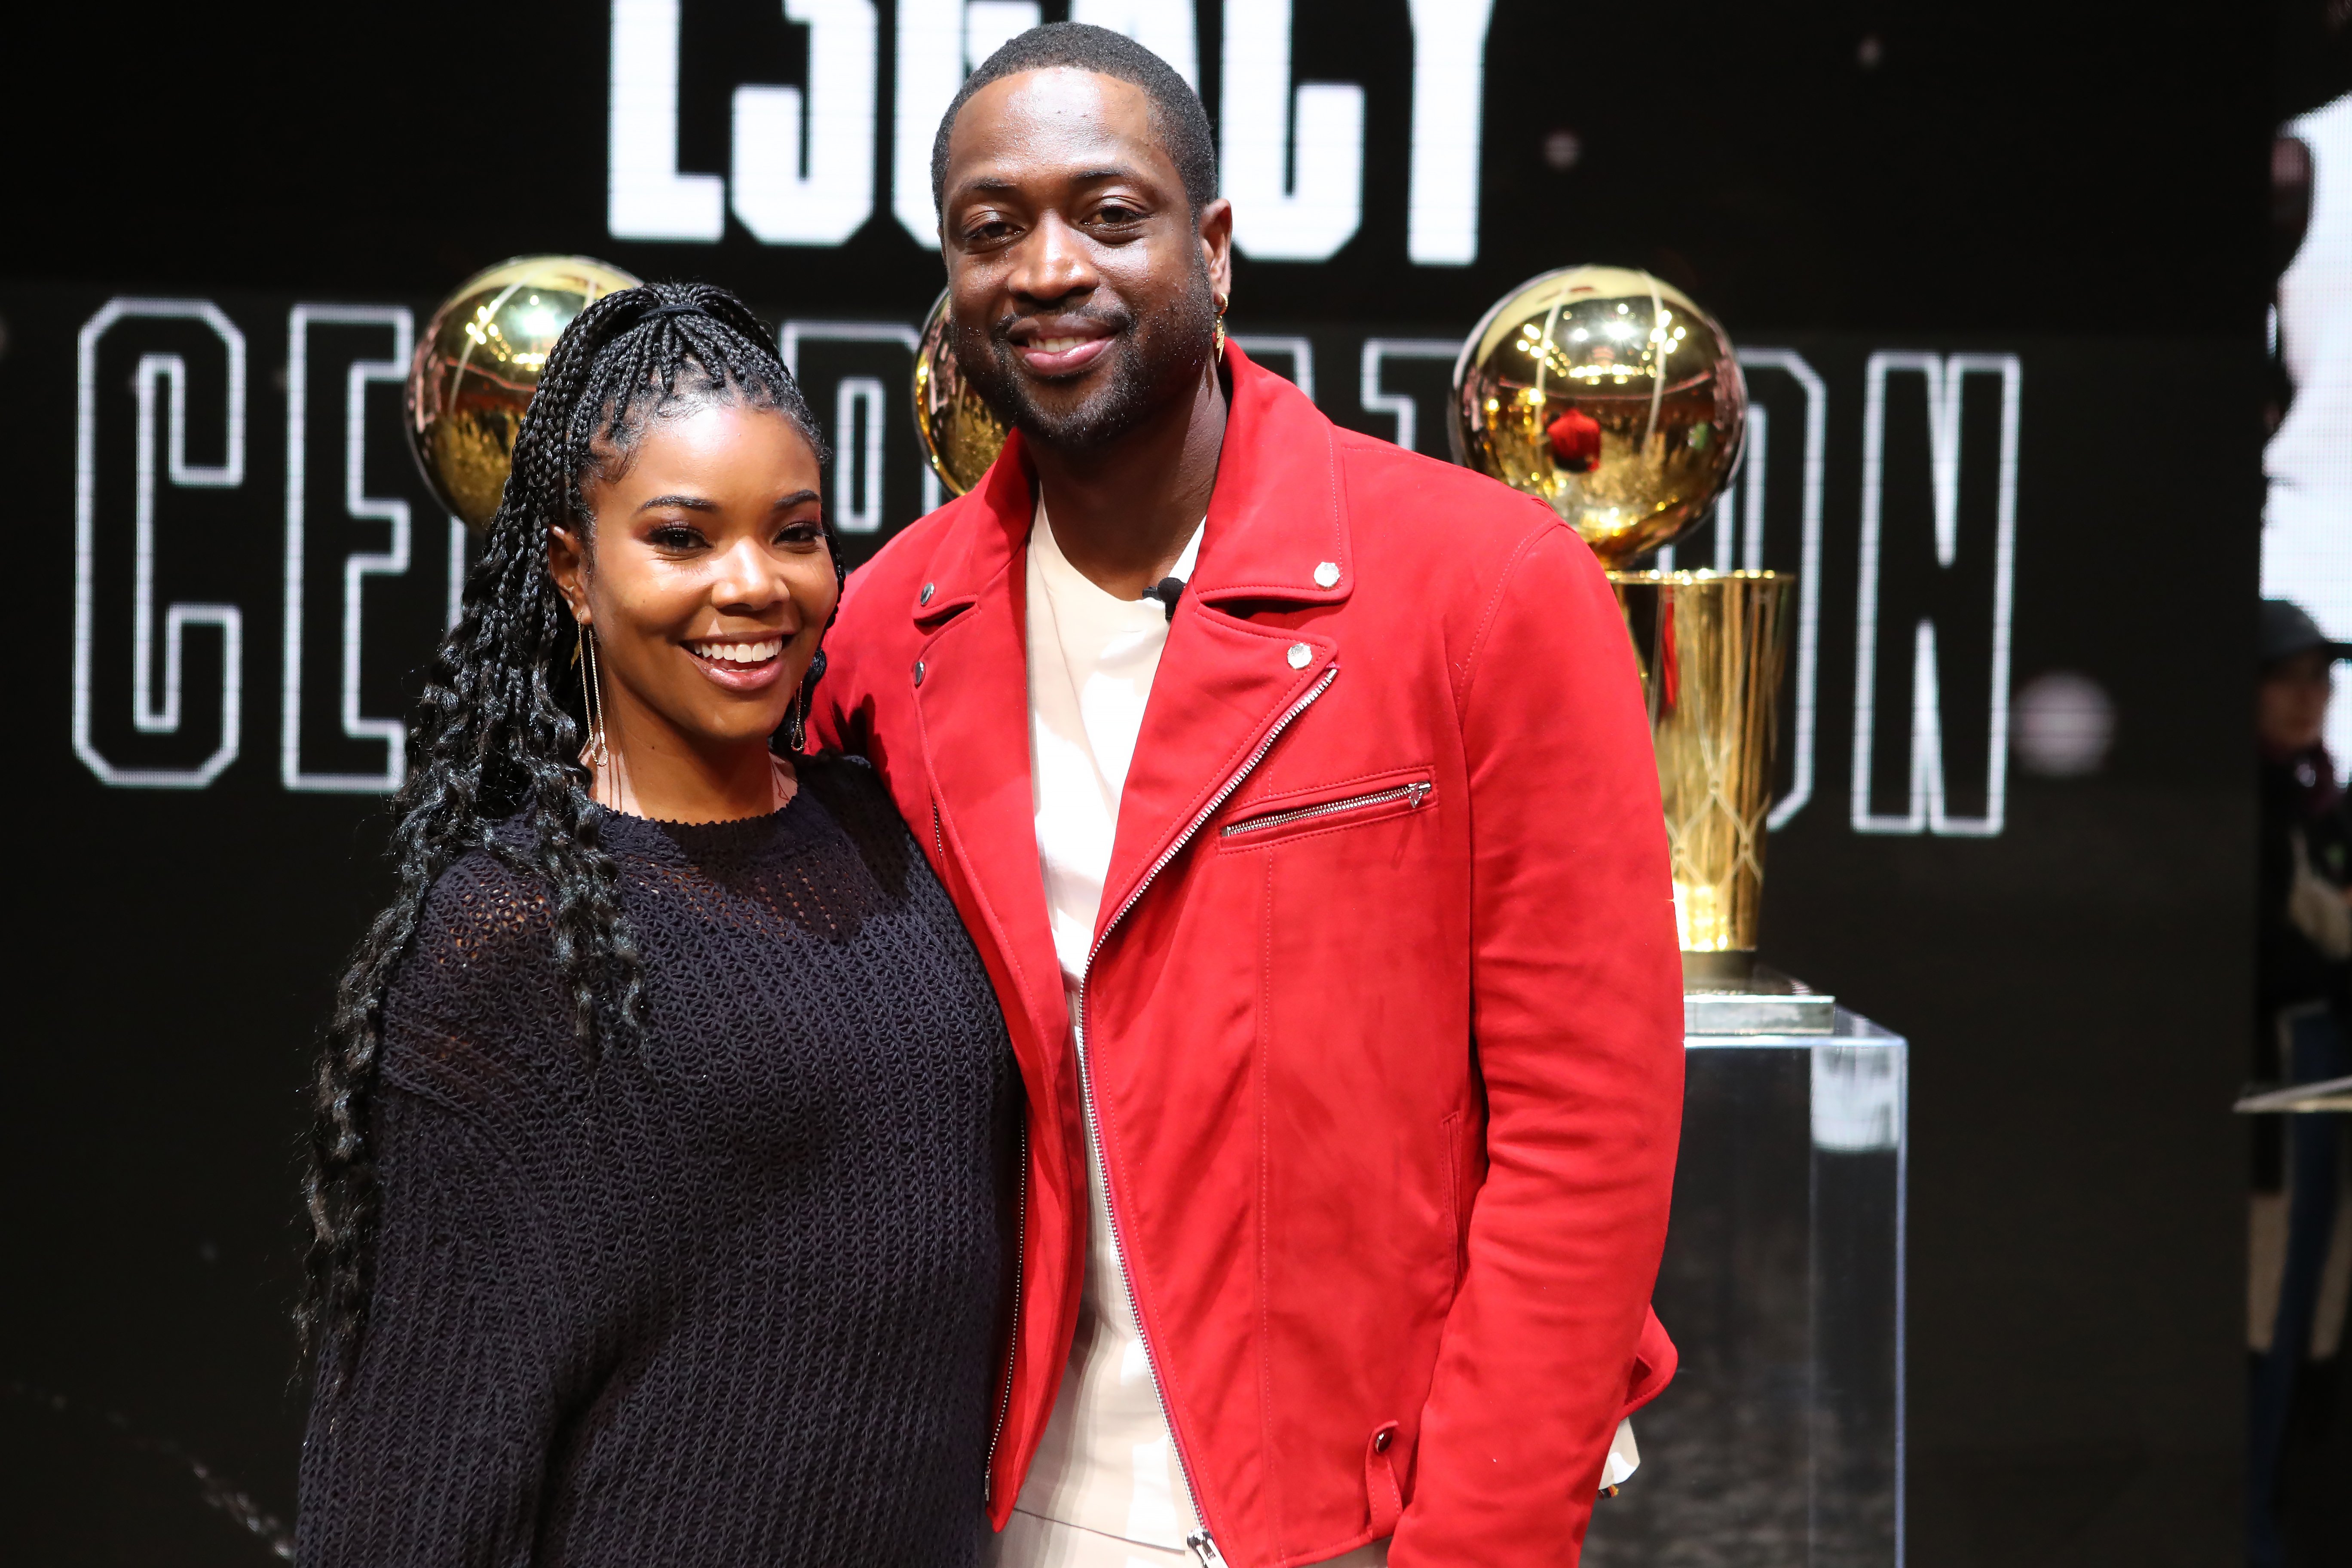 Dwyane Wade and Gabrielle Union attend the Jersey Retirement Flashback Event on February 21, 2020, in Miami, Florida. | Source: Getty Images.